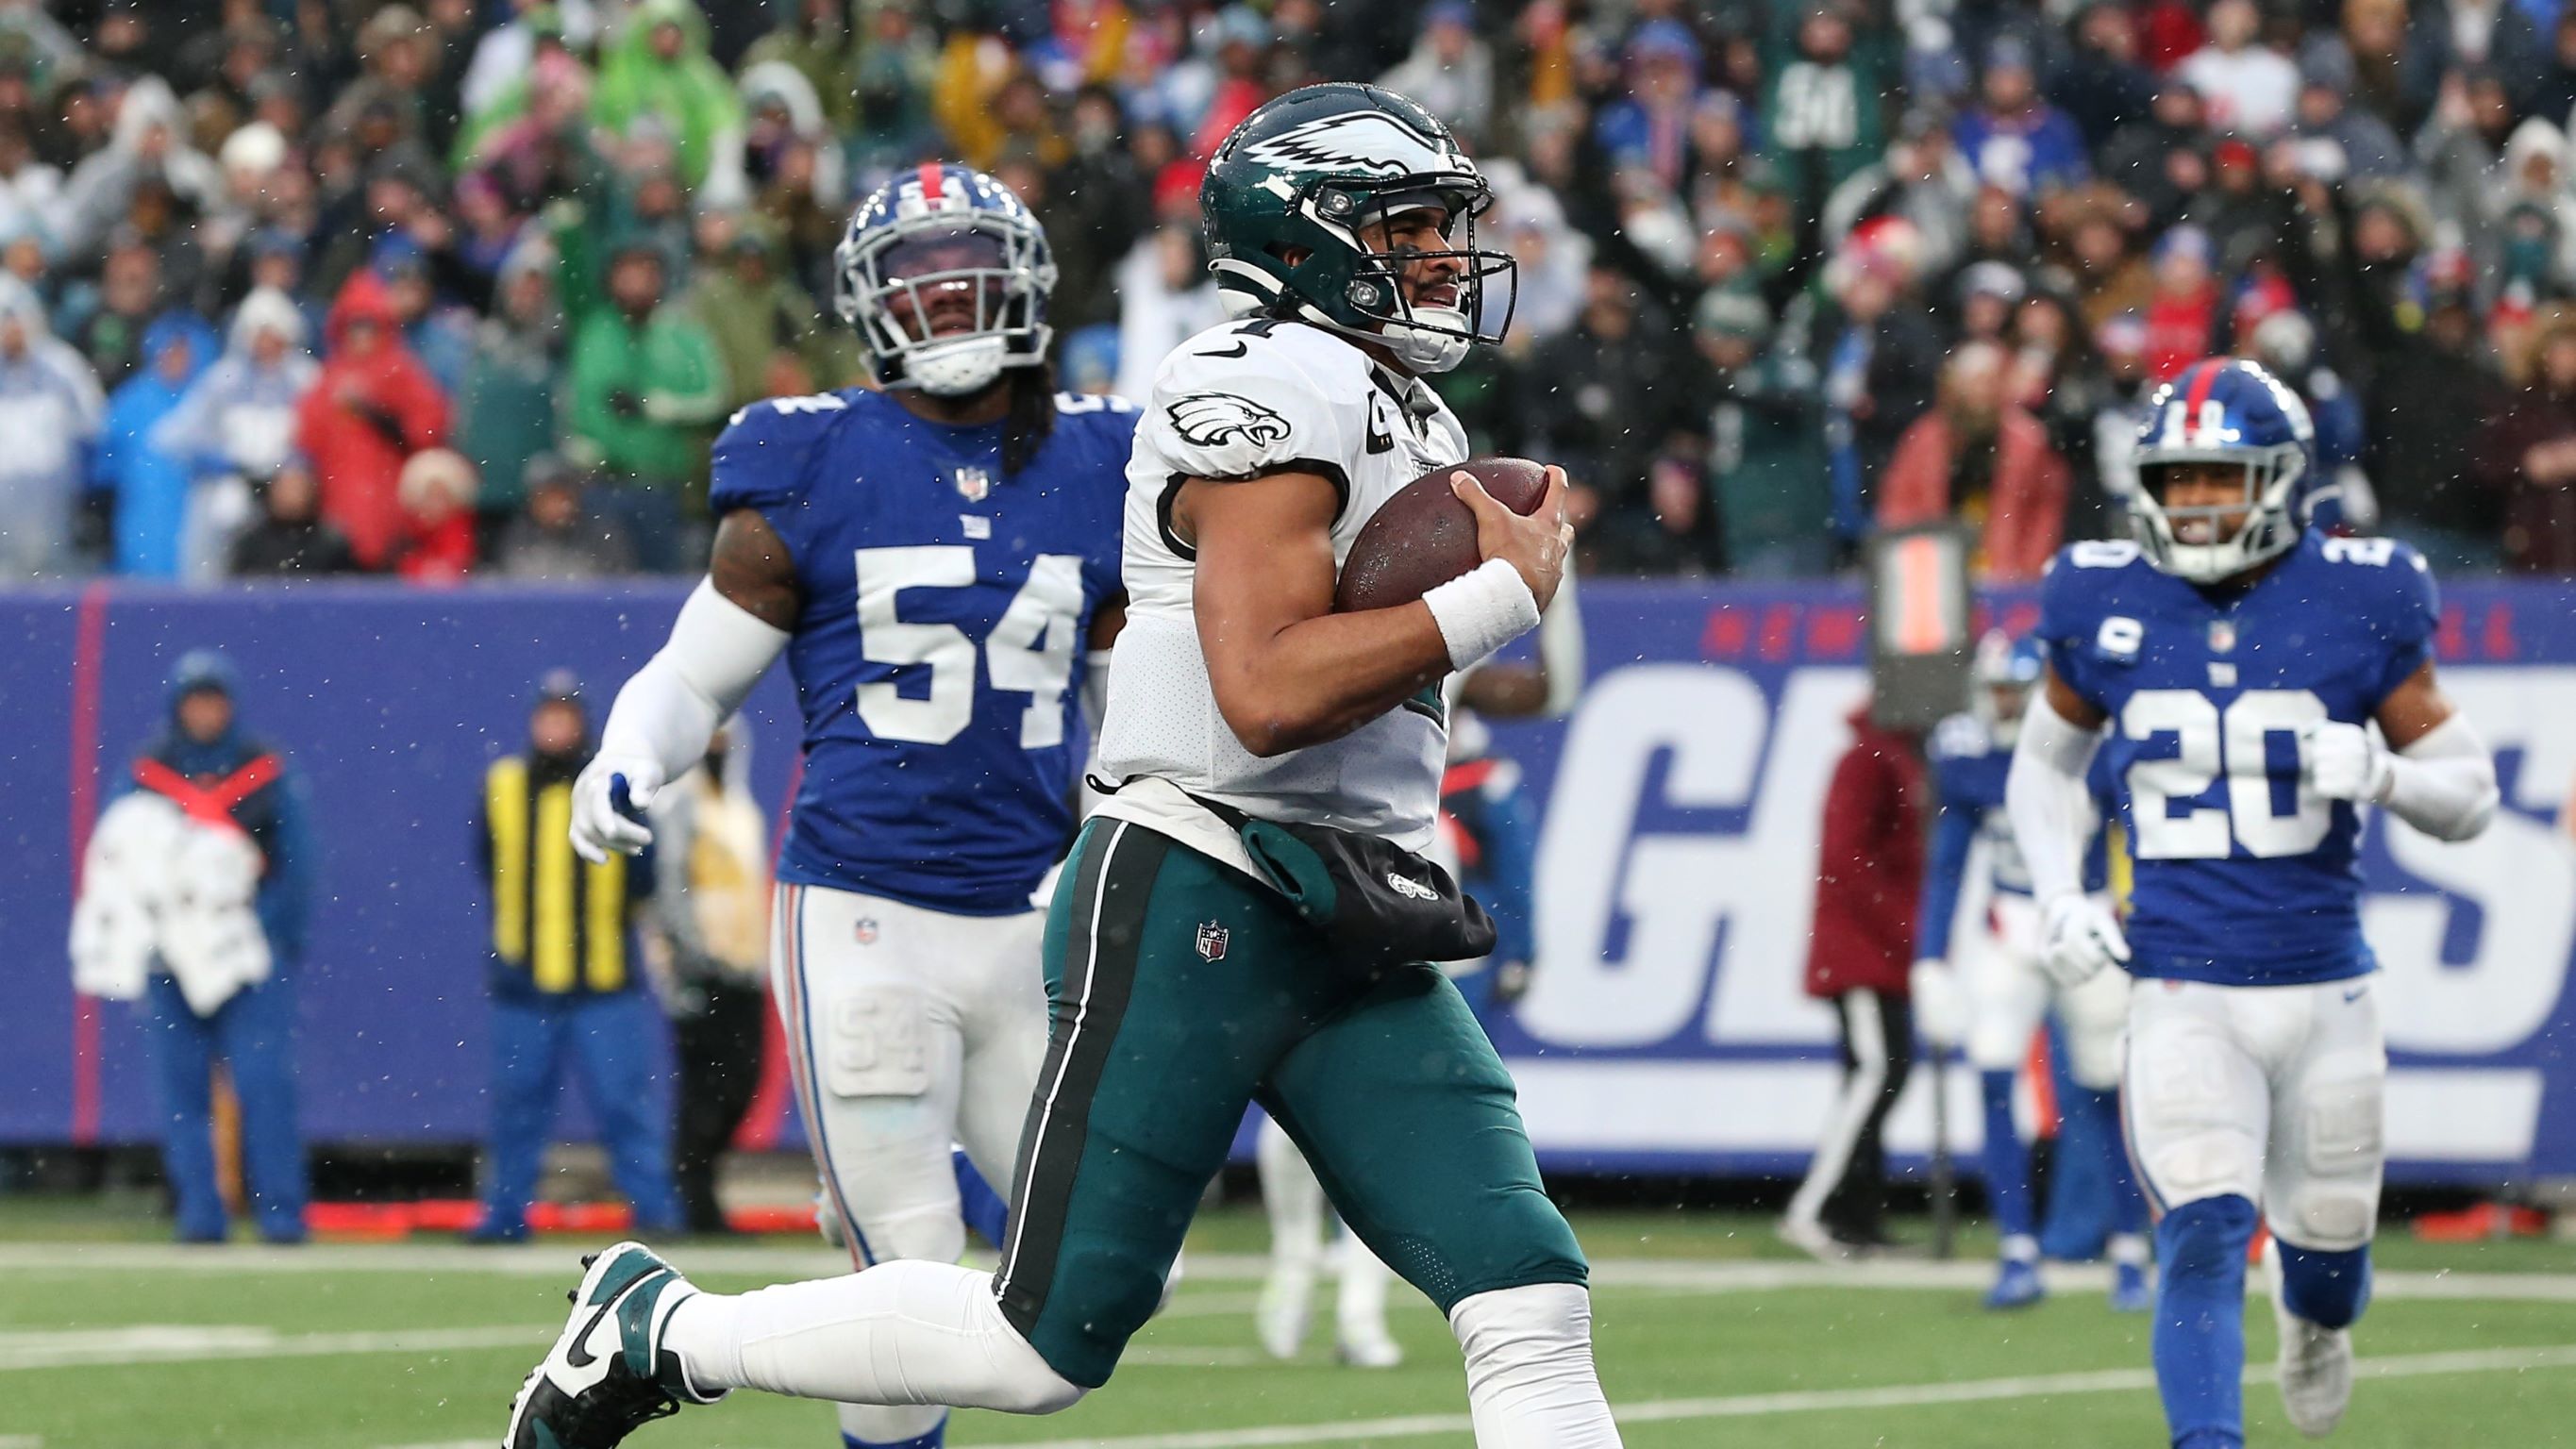 NFL sets kickoff time and date for huge Giants-Eagles matchup